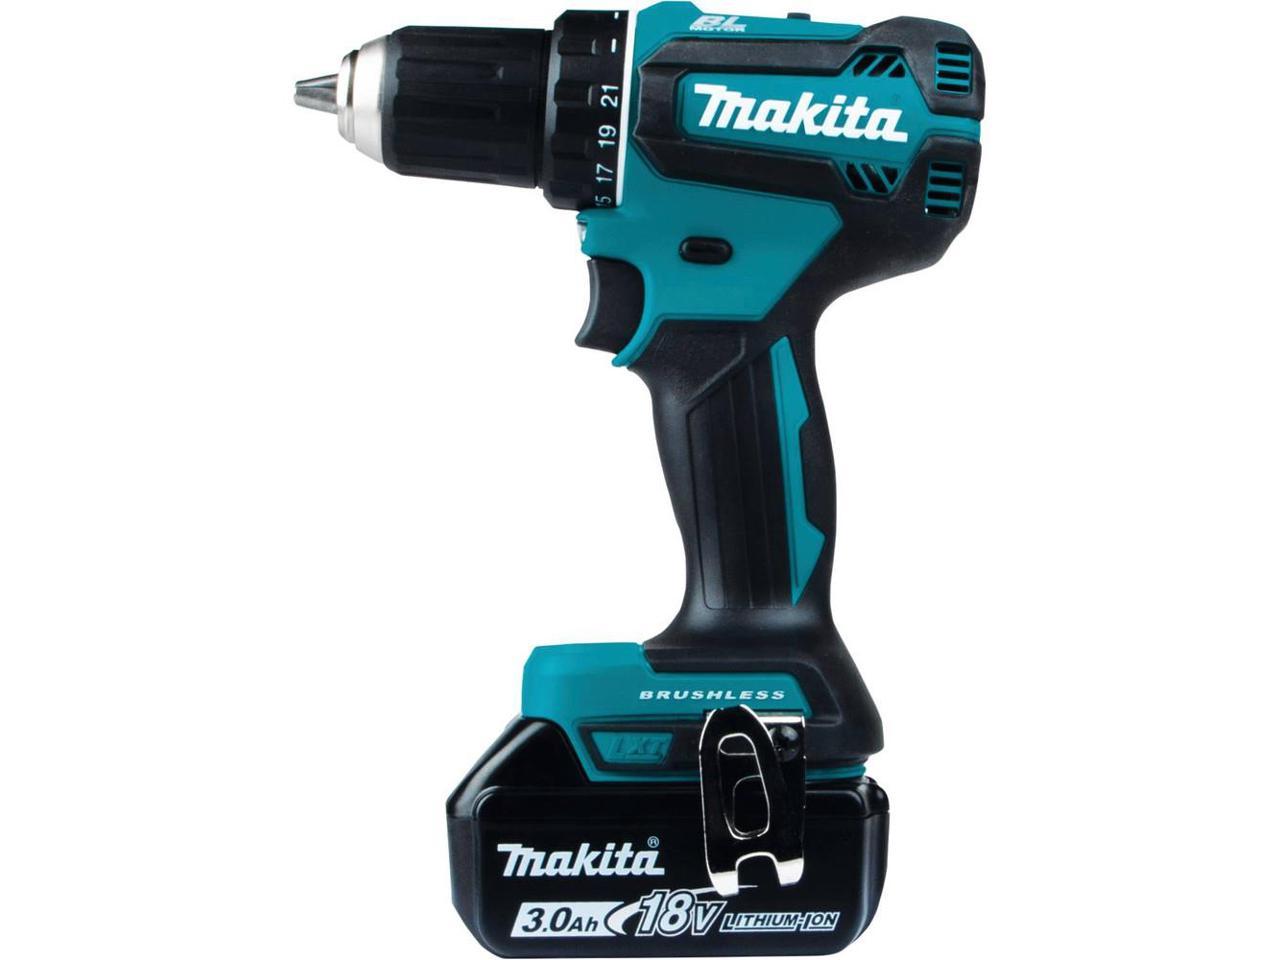 Makita XFD131 18v LXT Lithium Ion Brushless Cordless 1/2"" Driver Drill Kit for sale online 